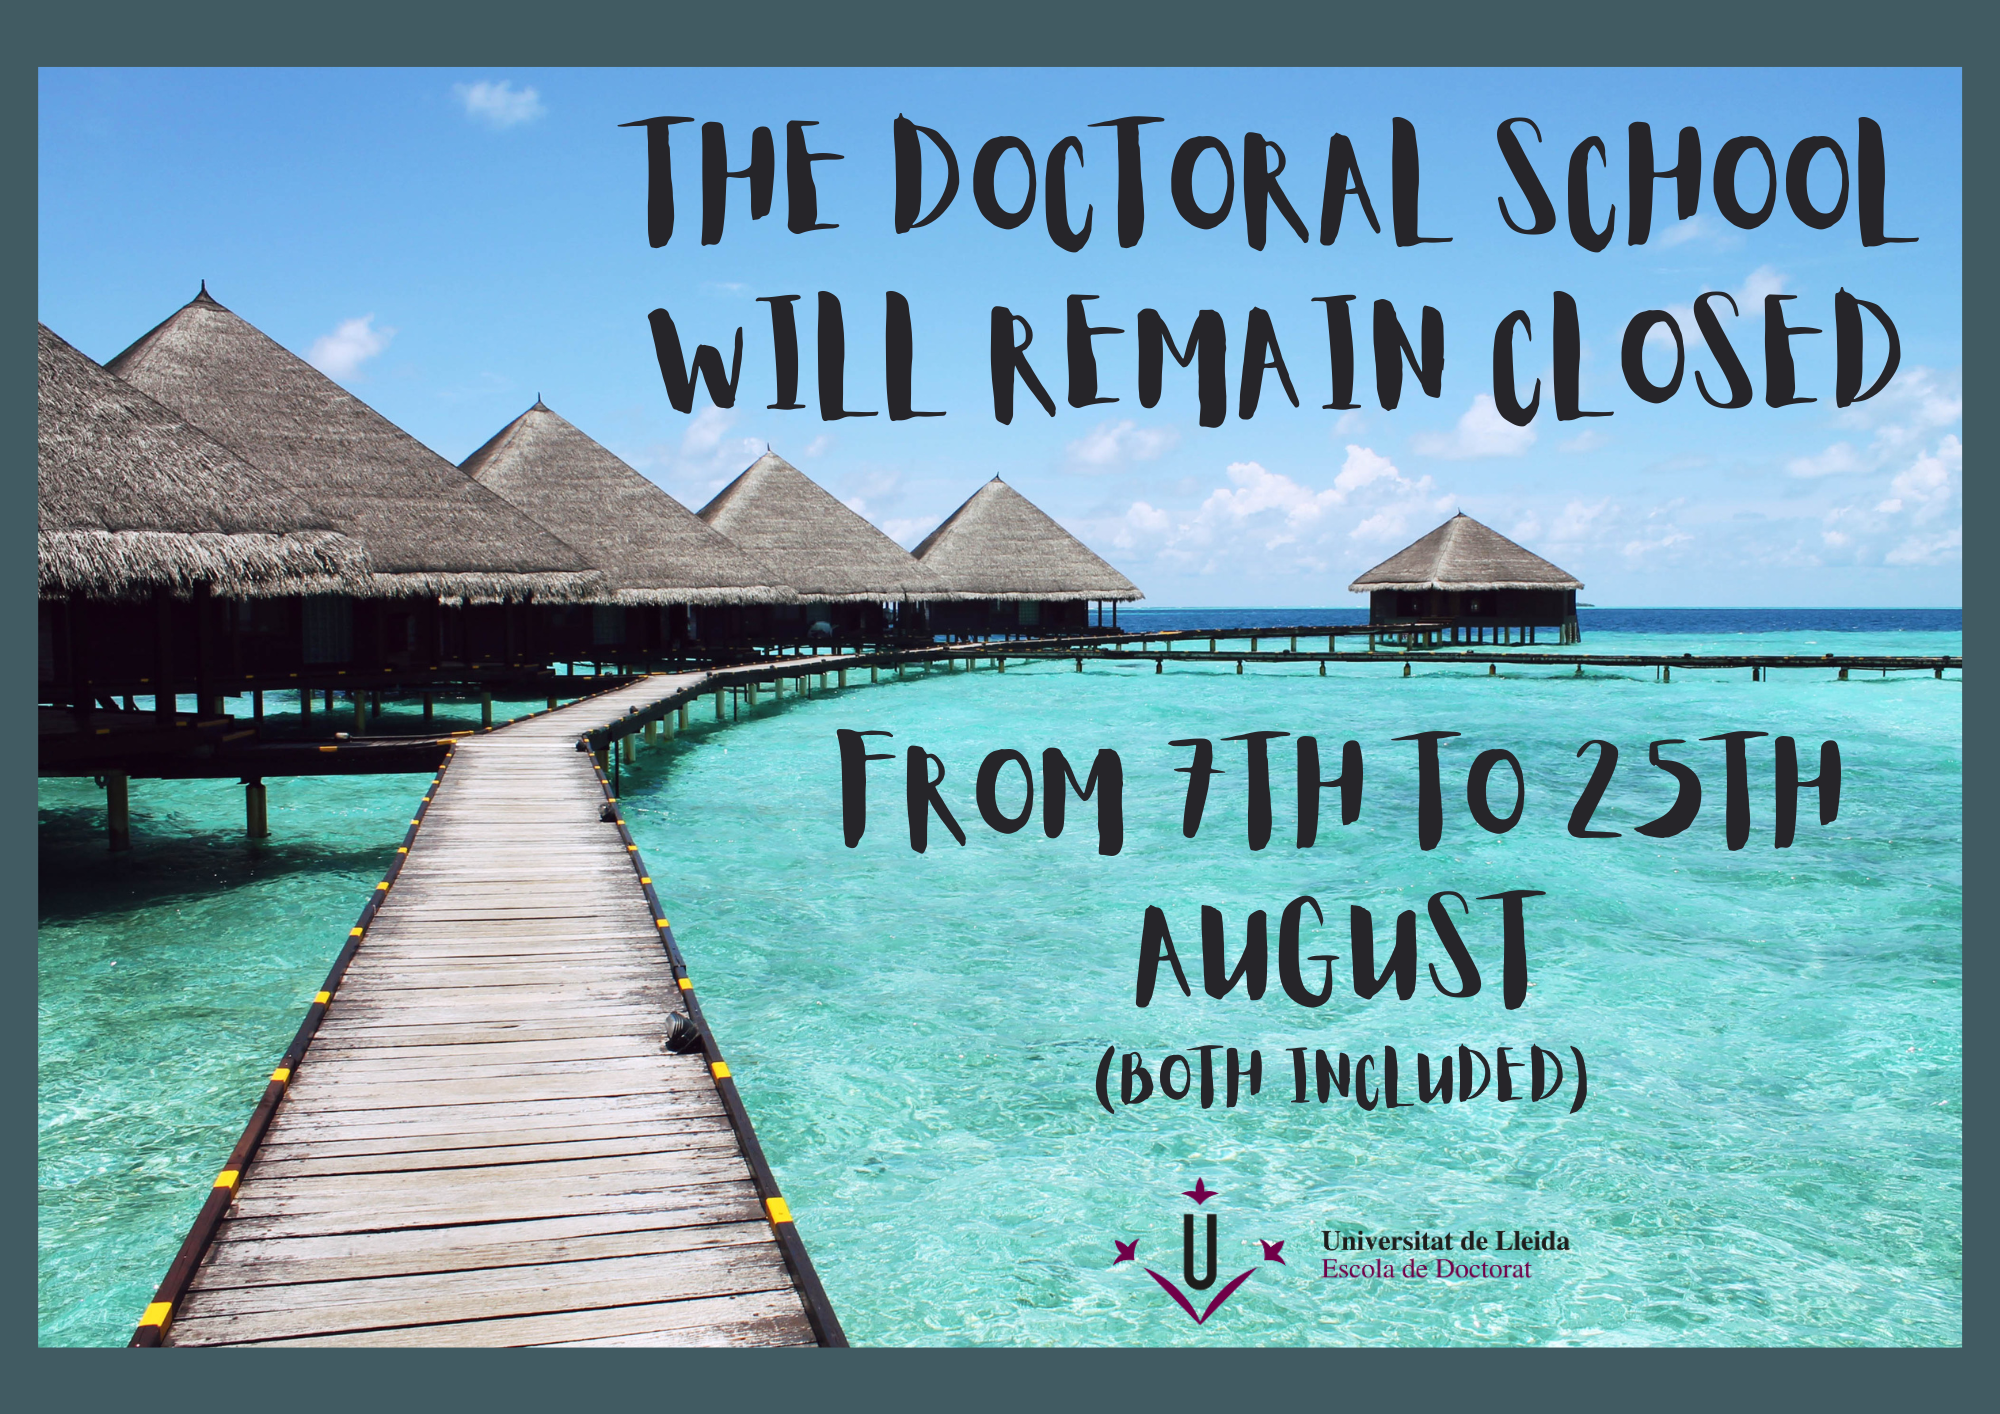 Doctoral School closed from 1st to 19th August 2022